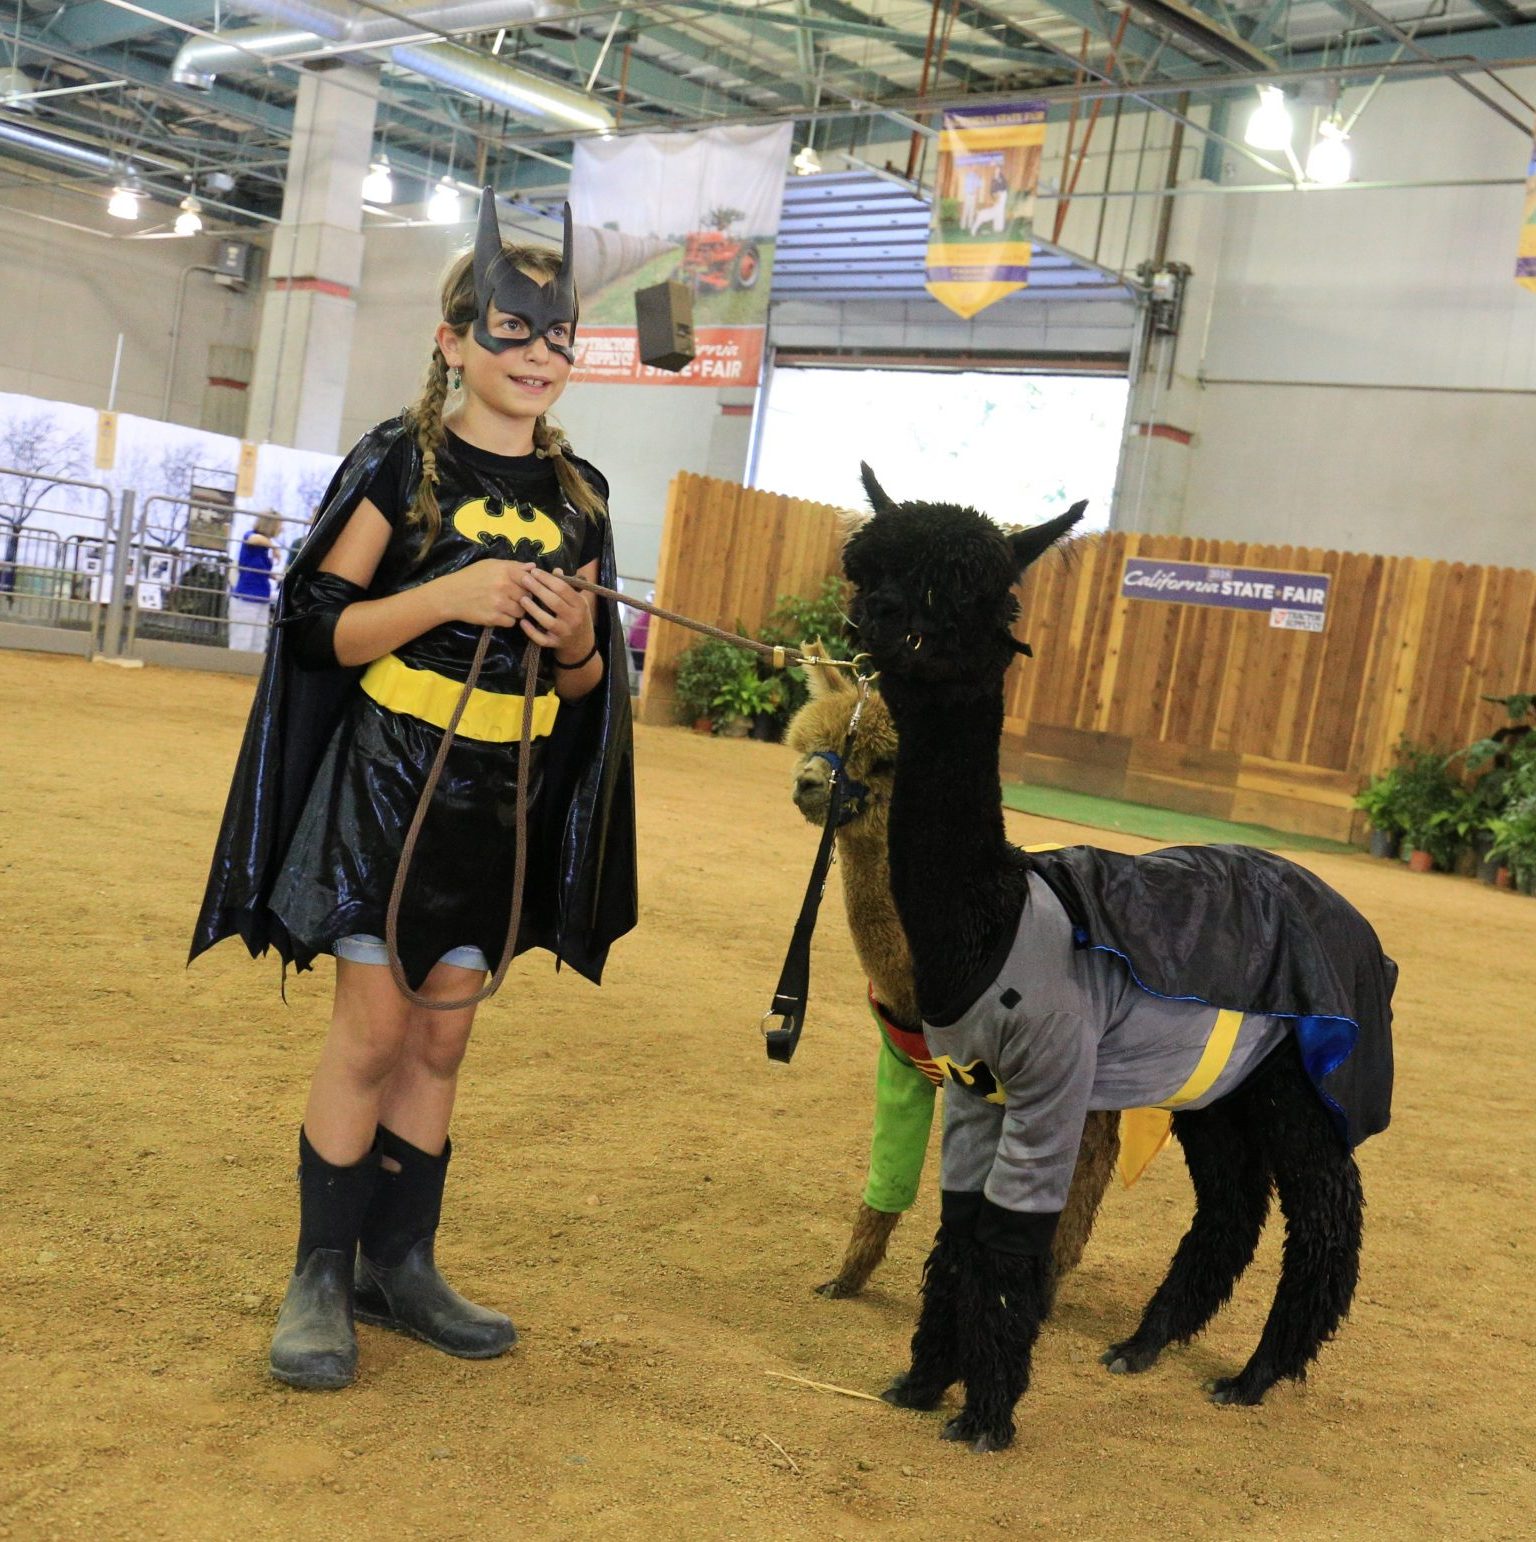 Alpaca and llama dressed up as bat man and robin with girl in bat man outfit